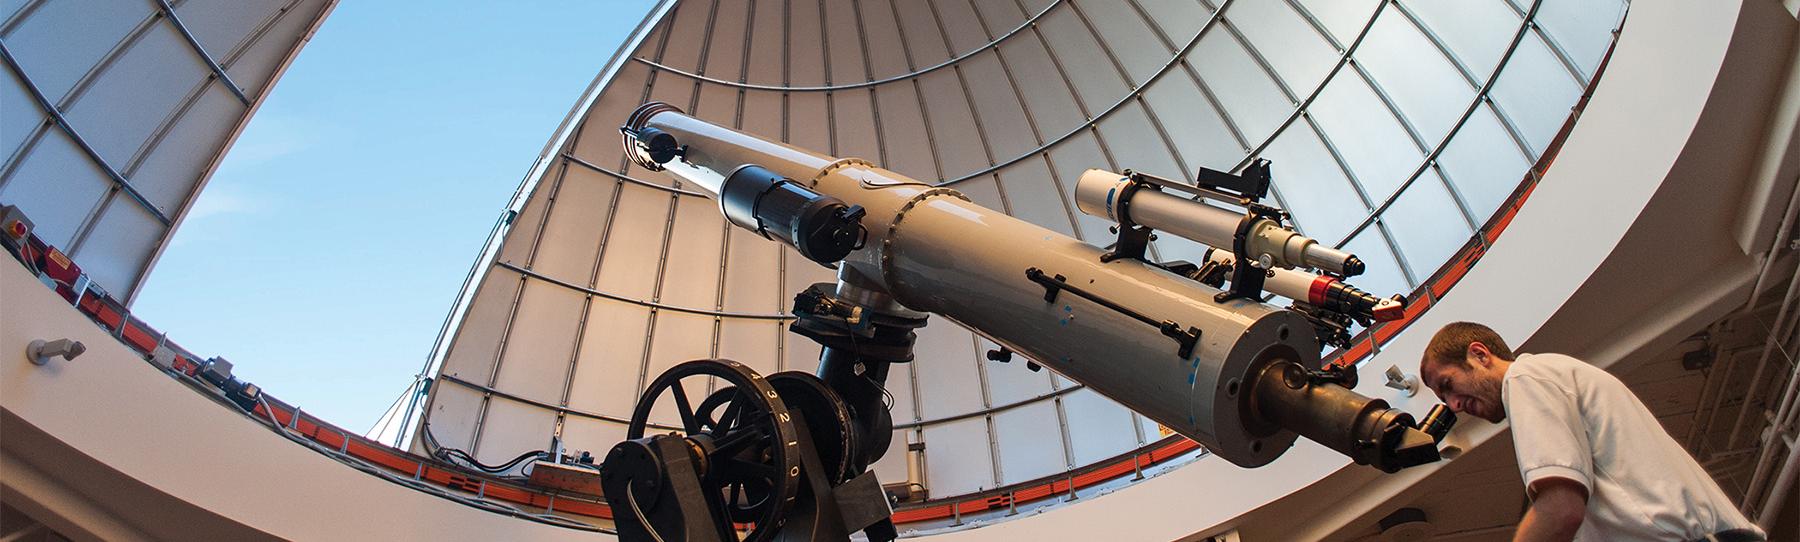 Observatory Educator Looks Through Alvan Clark Telescope During Solar Observing Hours With Dome Open Above Him Showing Blue Sky